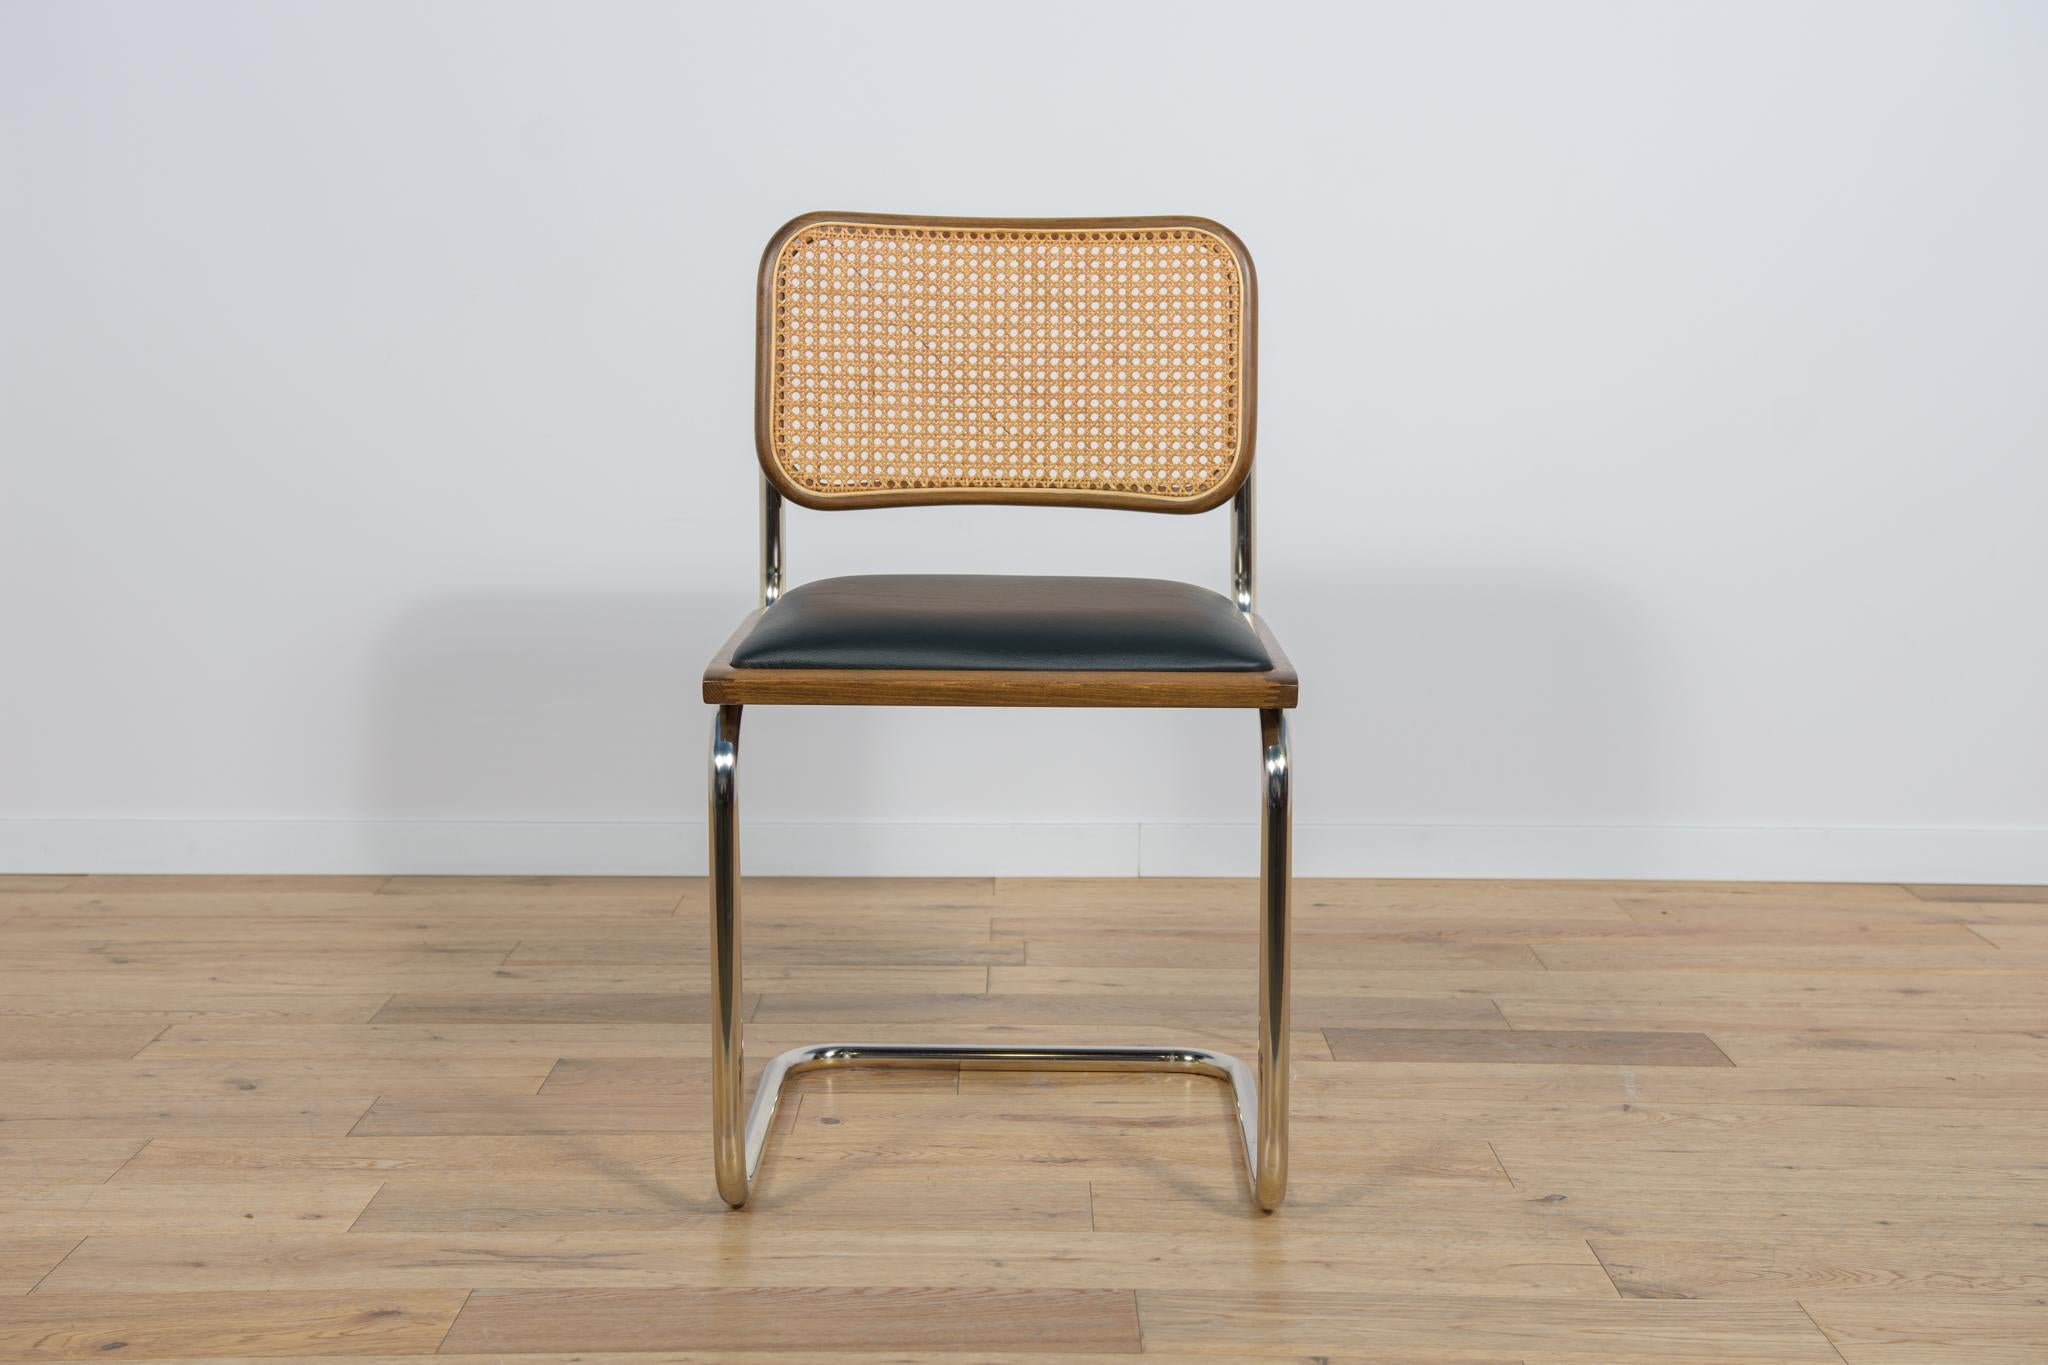 Cesca-type chair, modeled on Marcel Breuer's design from 1928. Produced in the 1980s. The chrome-plated frame is in very good original condition, has been cleaned and polished. The joinery has been professionally renovated, the beech wood has been